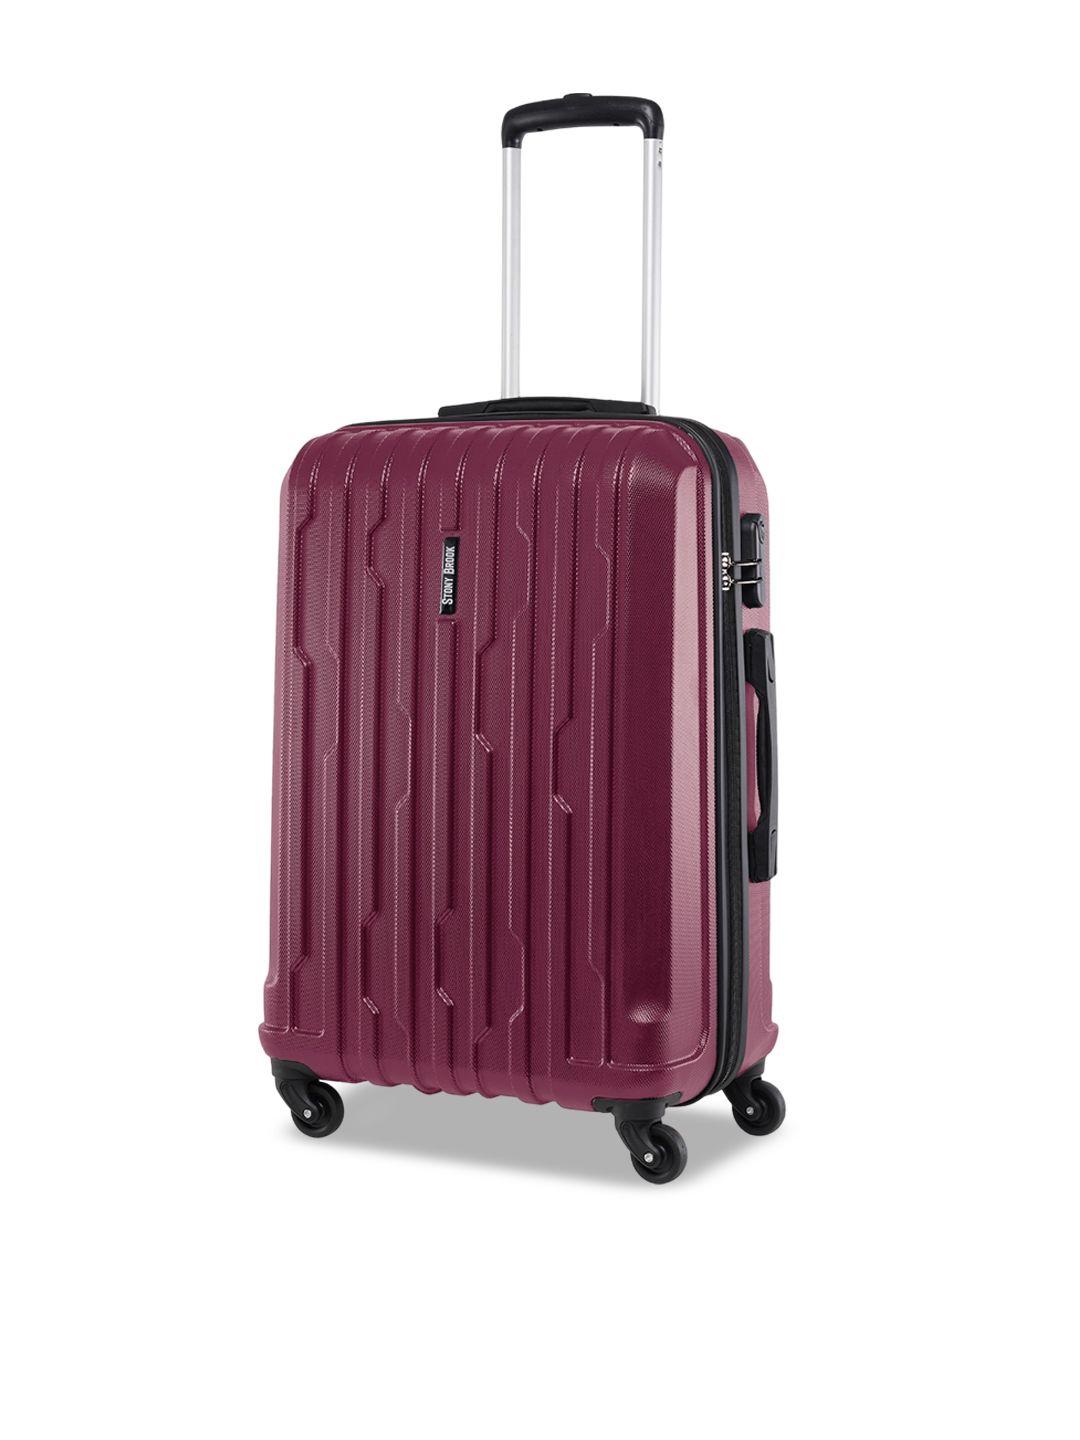 stony brook by nasher miles set of 3 textured hard-sided polycarbonate trolley suitcase